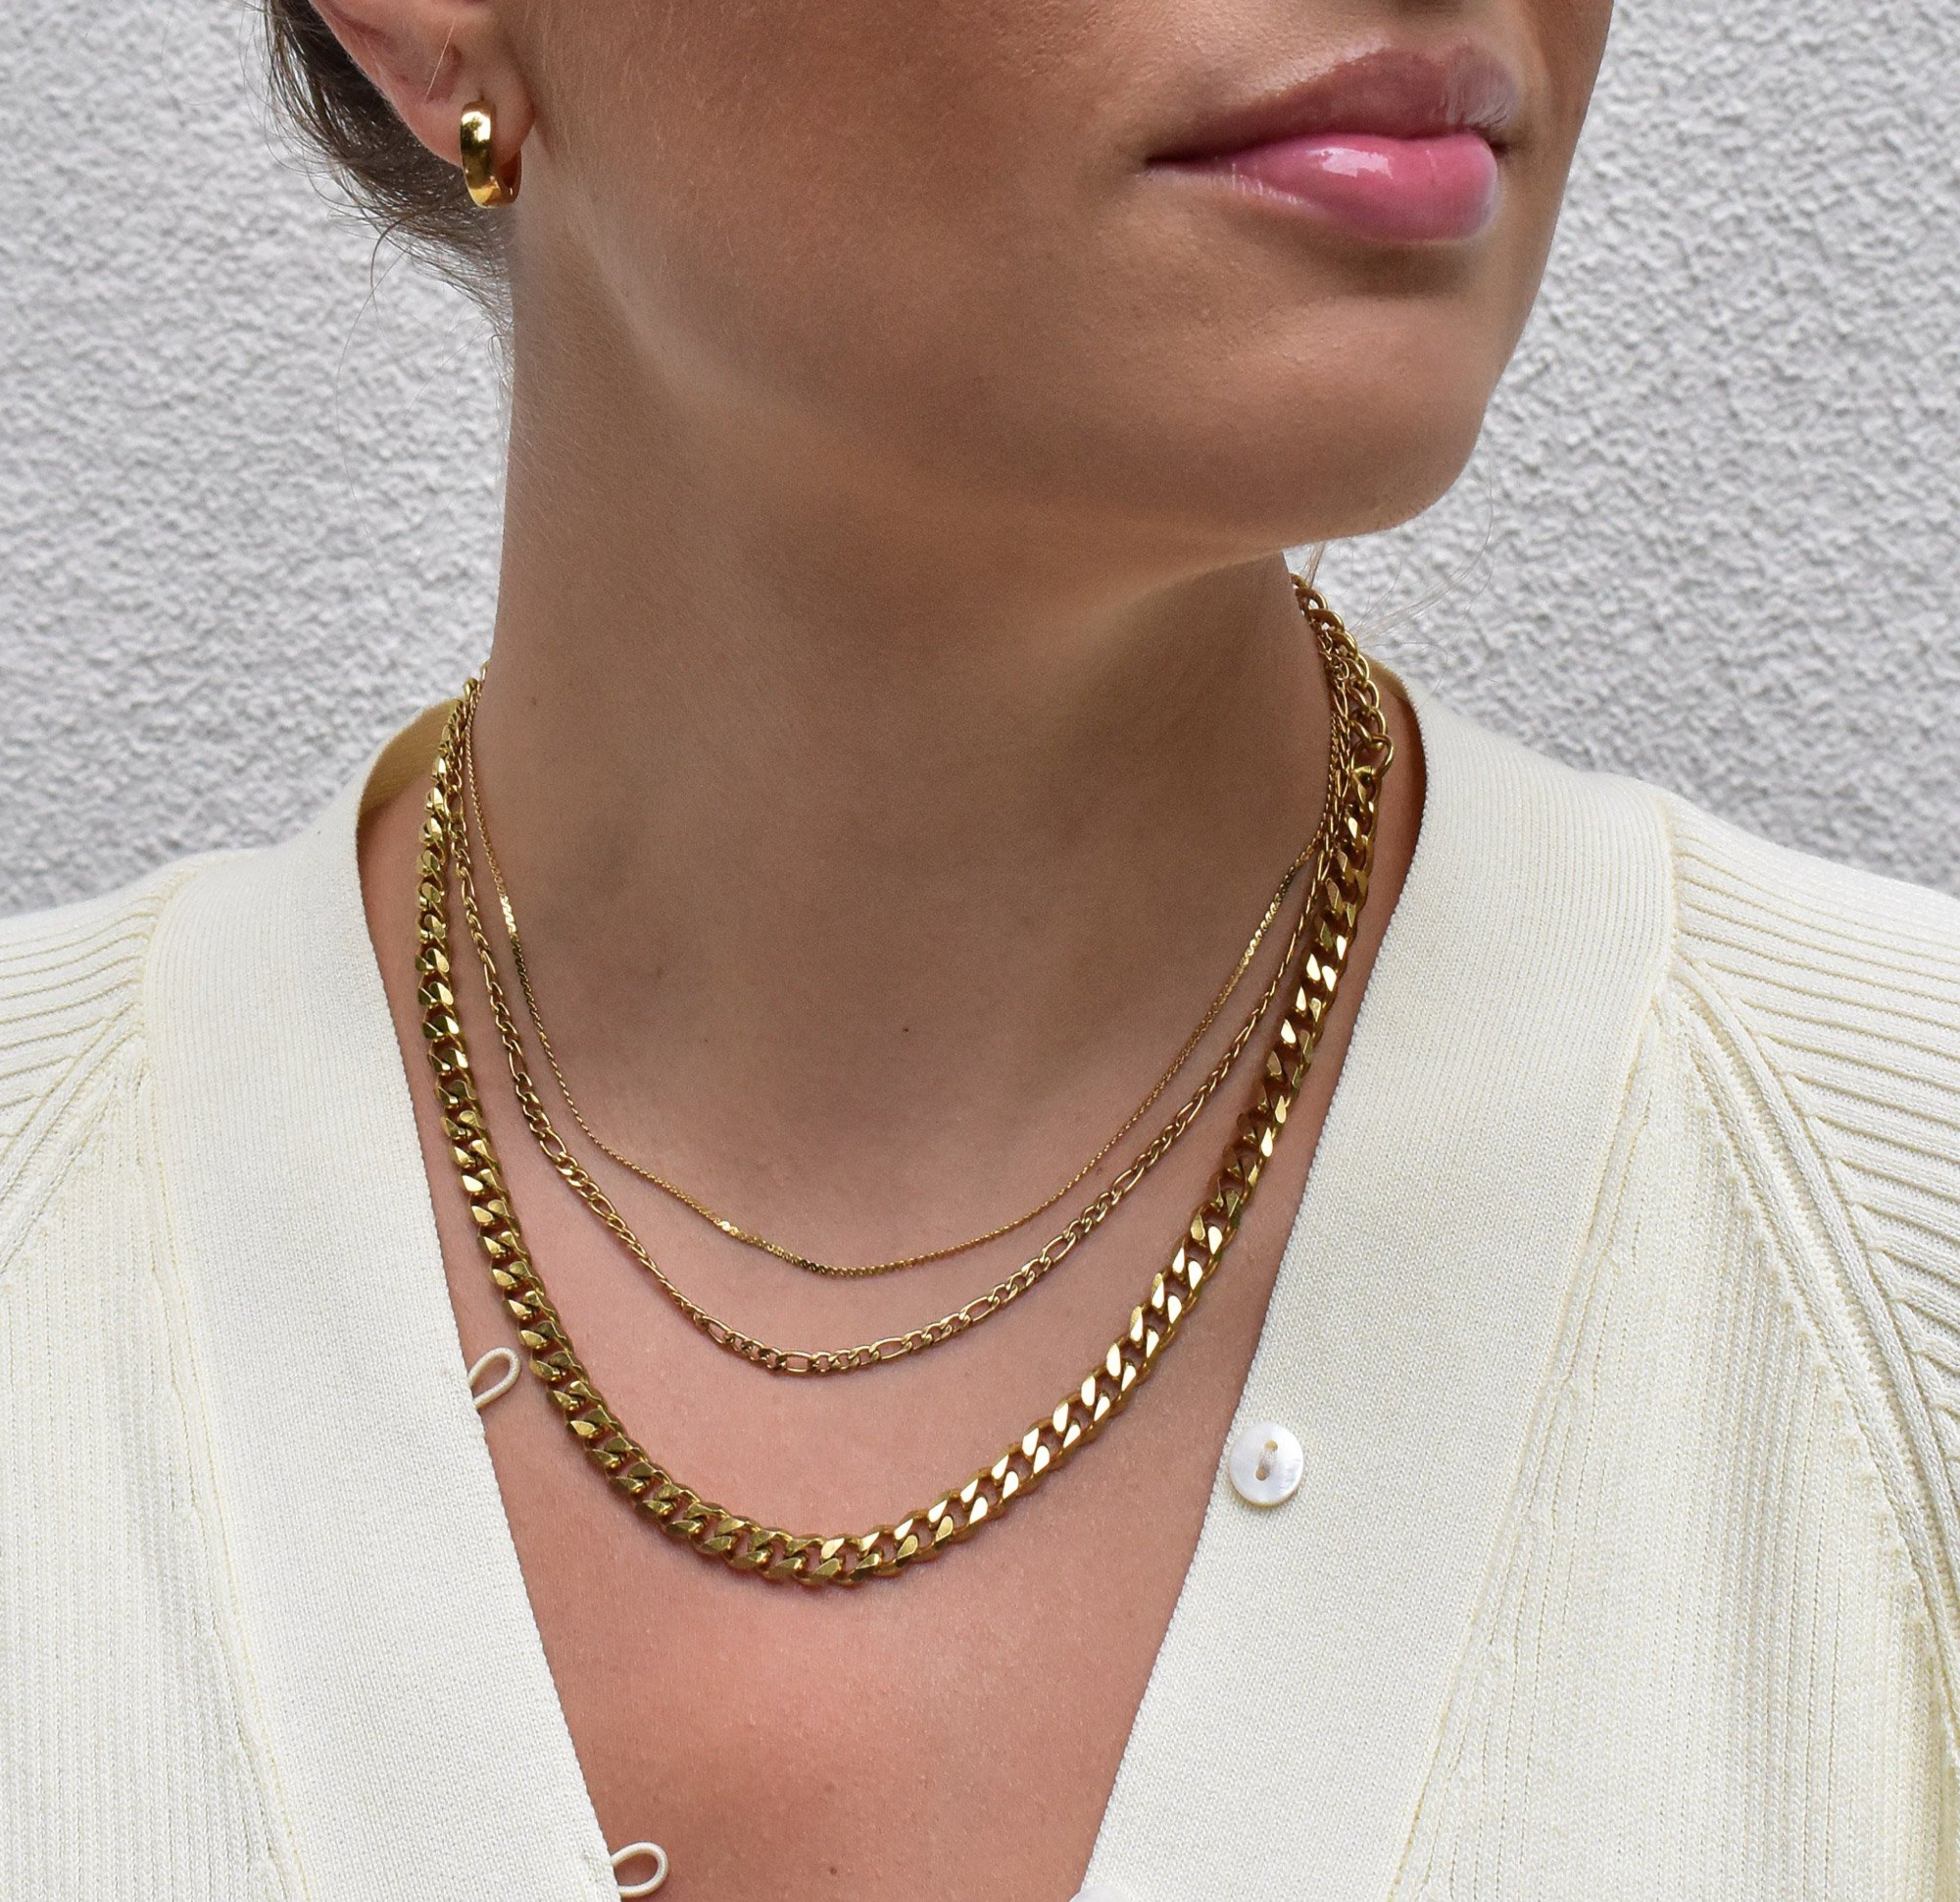 gold chain necklace waterproof jewelry